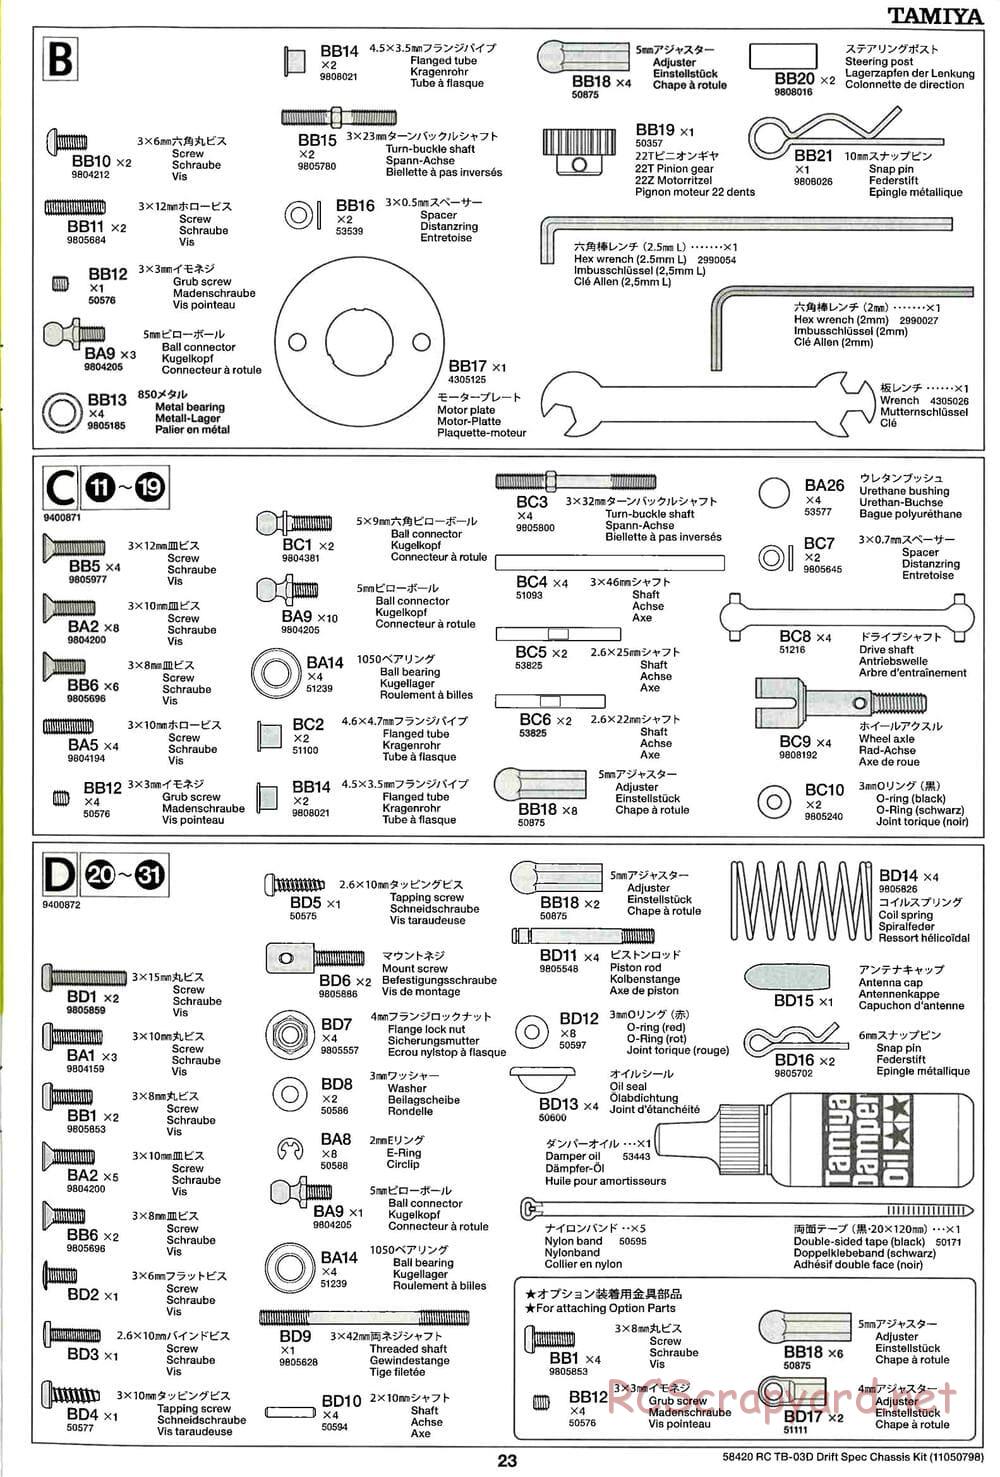 Tamiya - TB-03D HP Drift Spec Chassis - Manual - Page 23